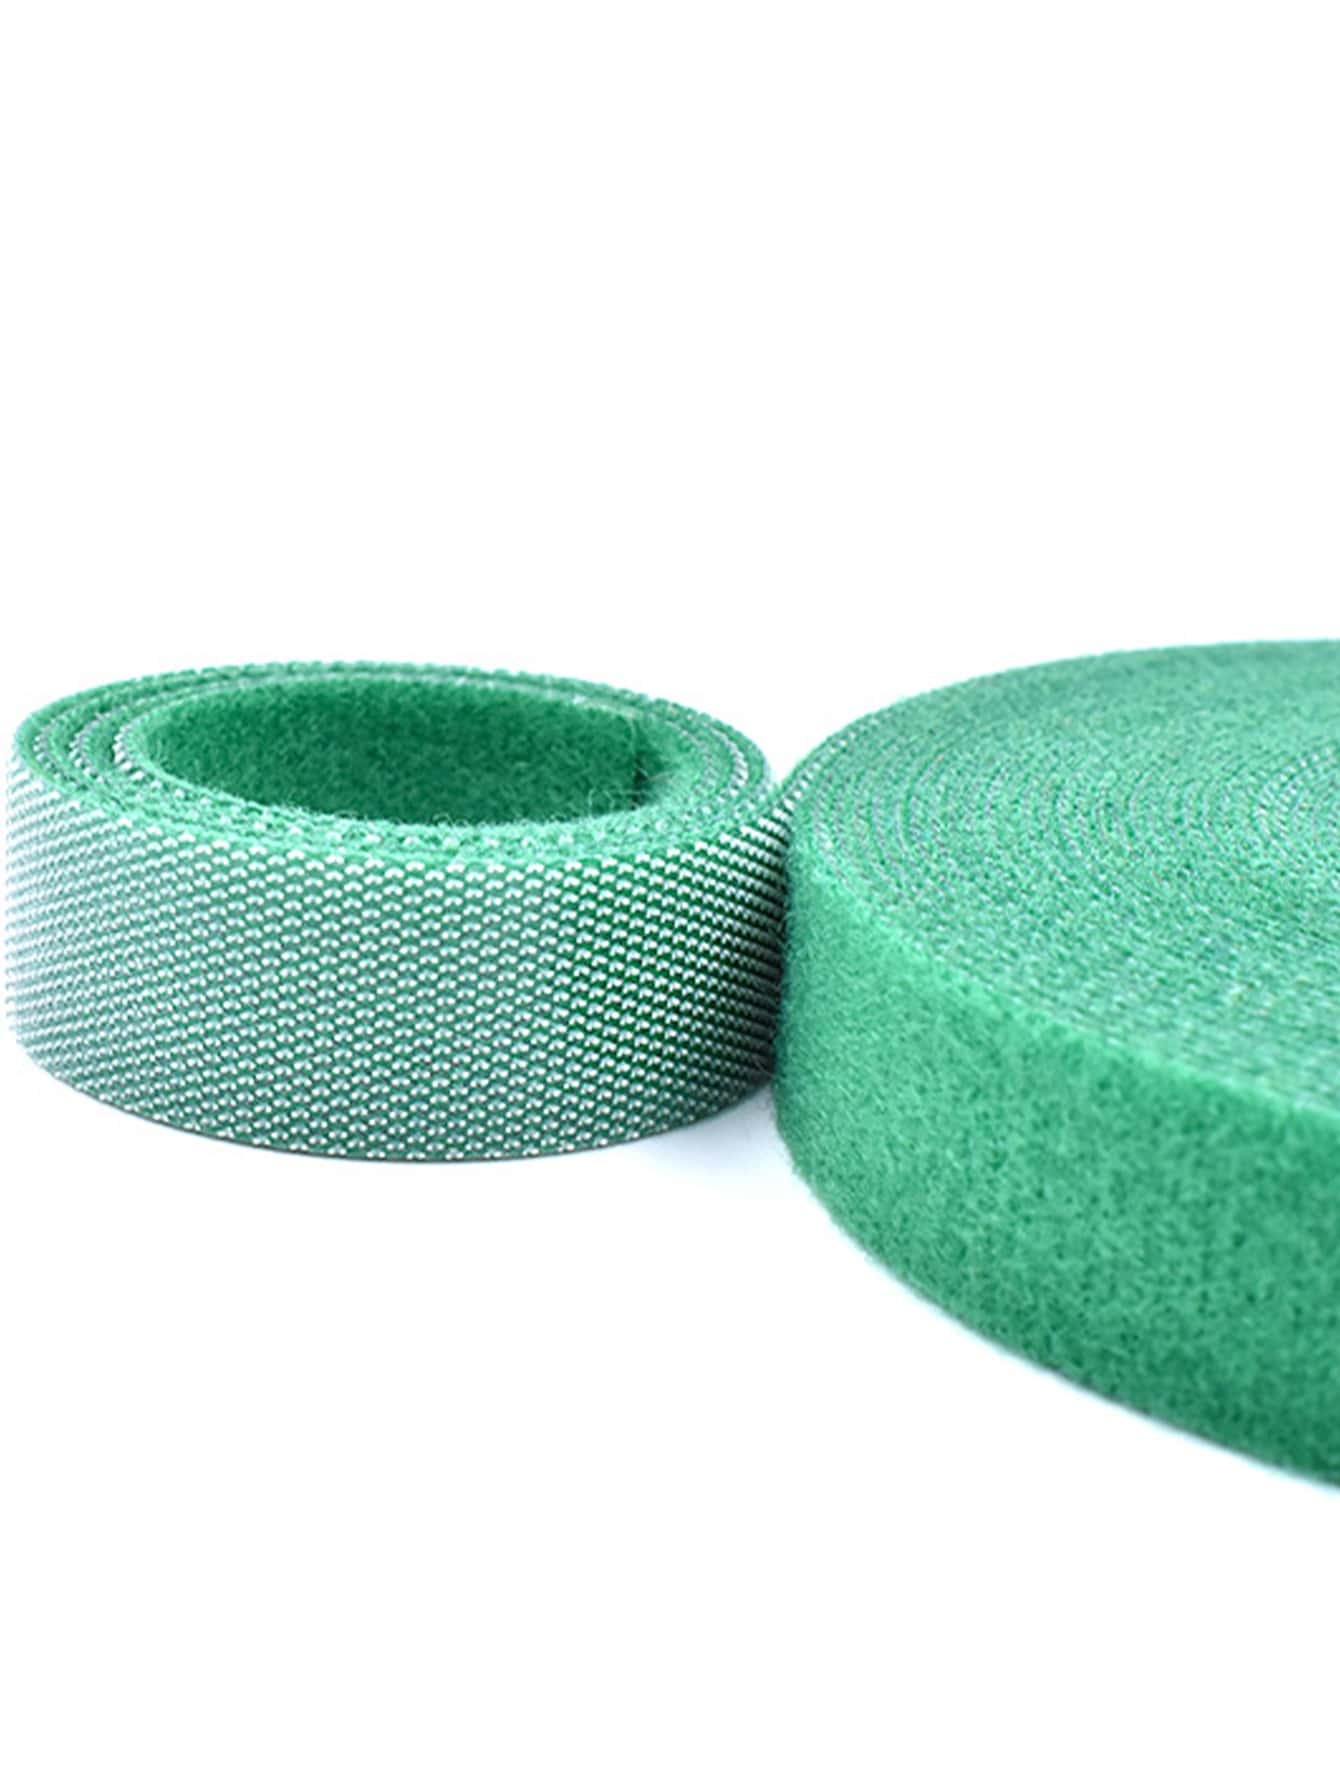 2pcs Plant Ties,Nylon Plant Bandage Tie,Home Garden Plant Shape Tape,Hook Loop,Bamboo Cane Wrap Support Accessories